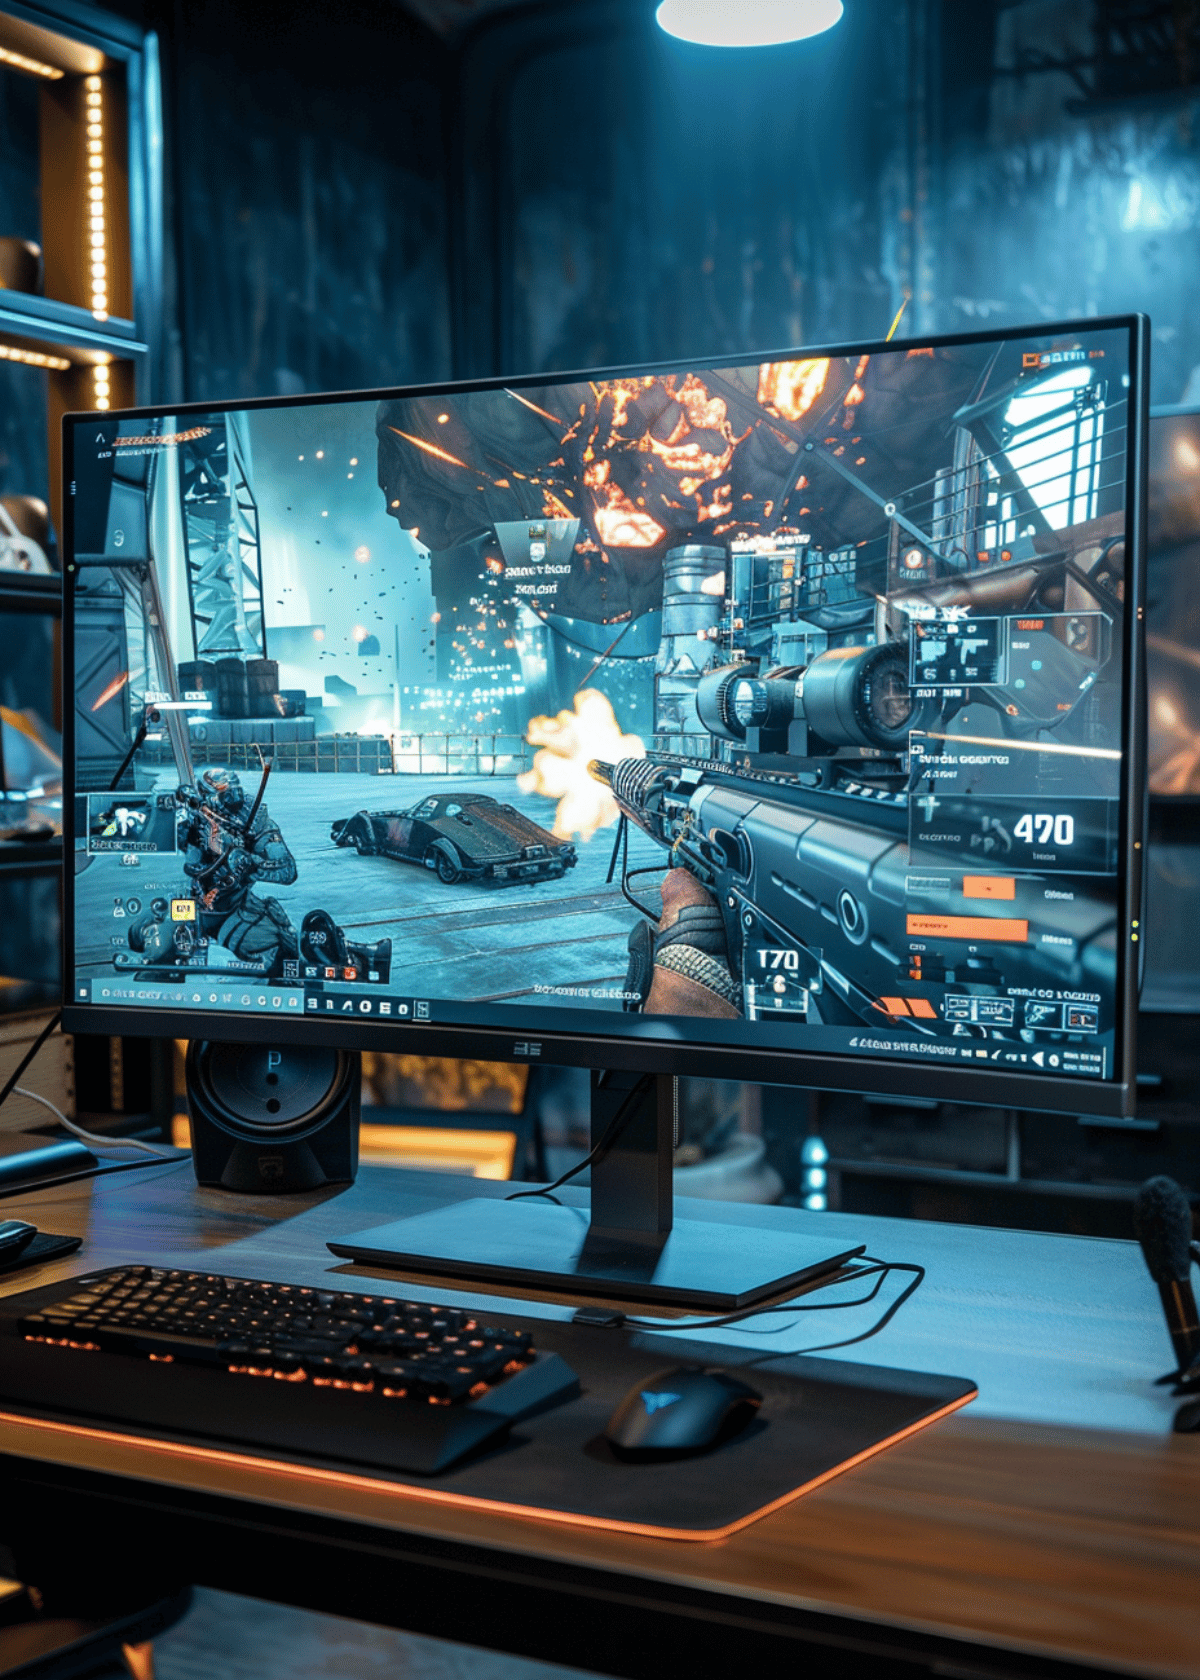 Why High Refresh Rate Monitors Improve Gaming?